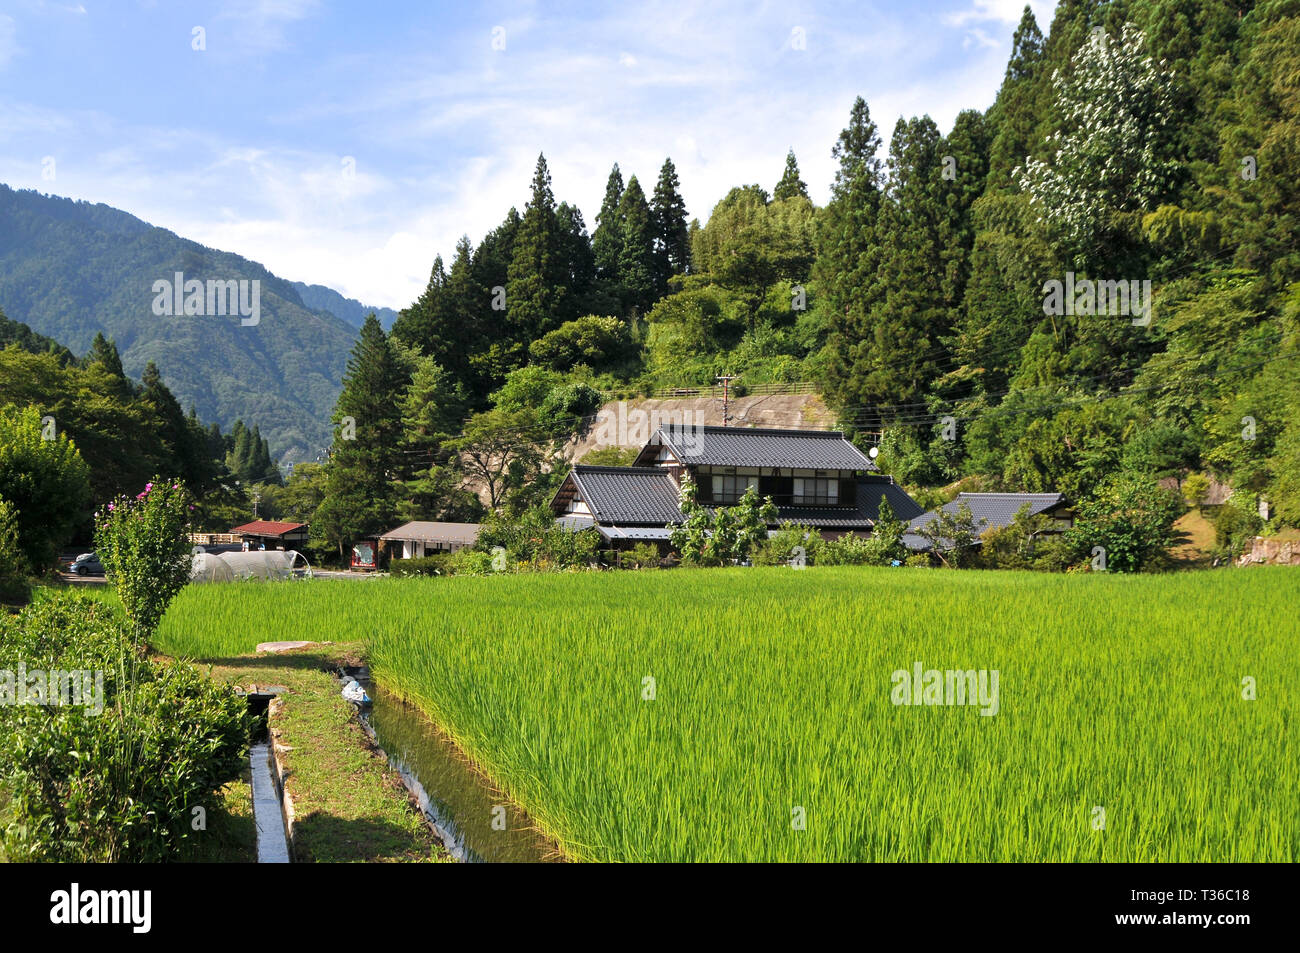 Tsumago, Nagano, Japan - 30th July 2018 : Beautiful view of a typical Japanese house surrounded by a rice field on the Nakasendo road trail in Japan Stock Photo